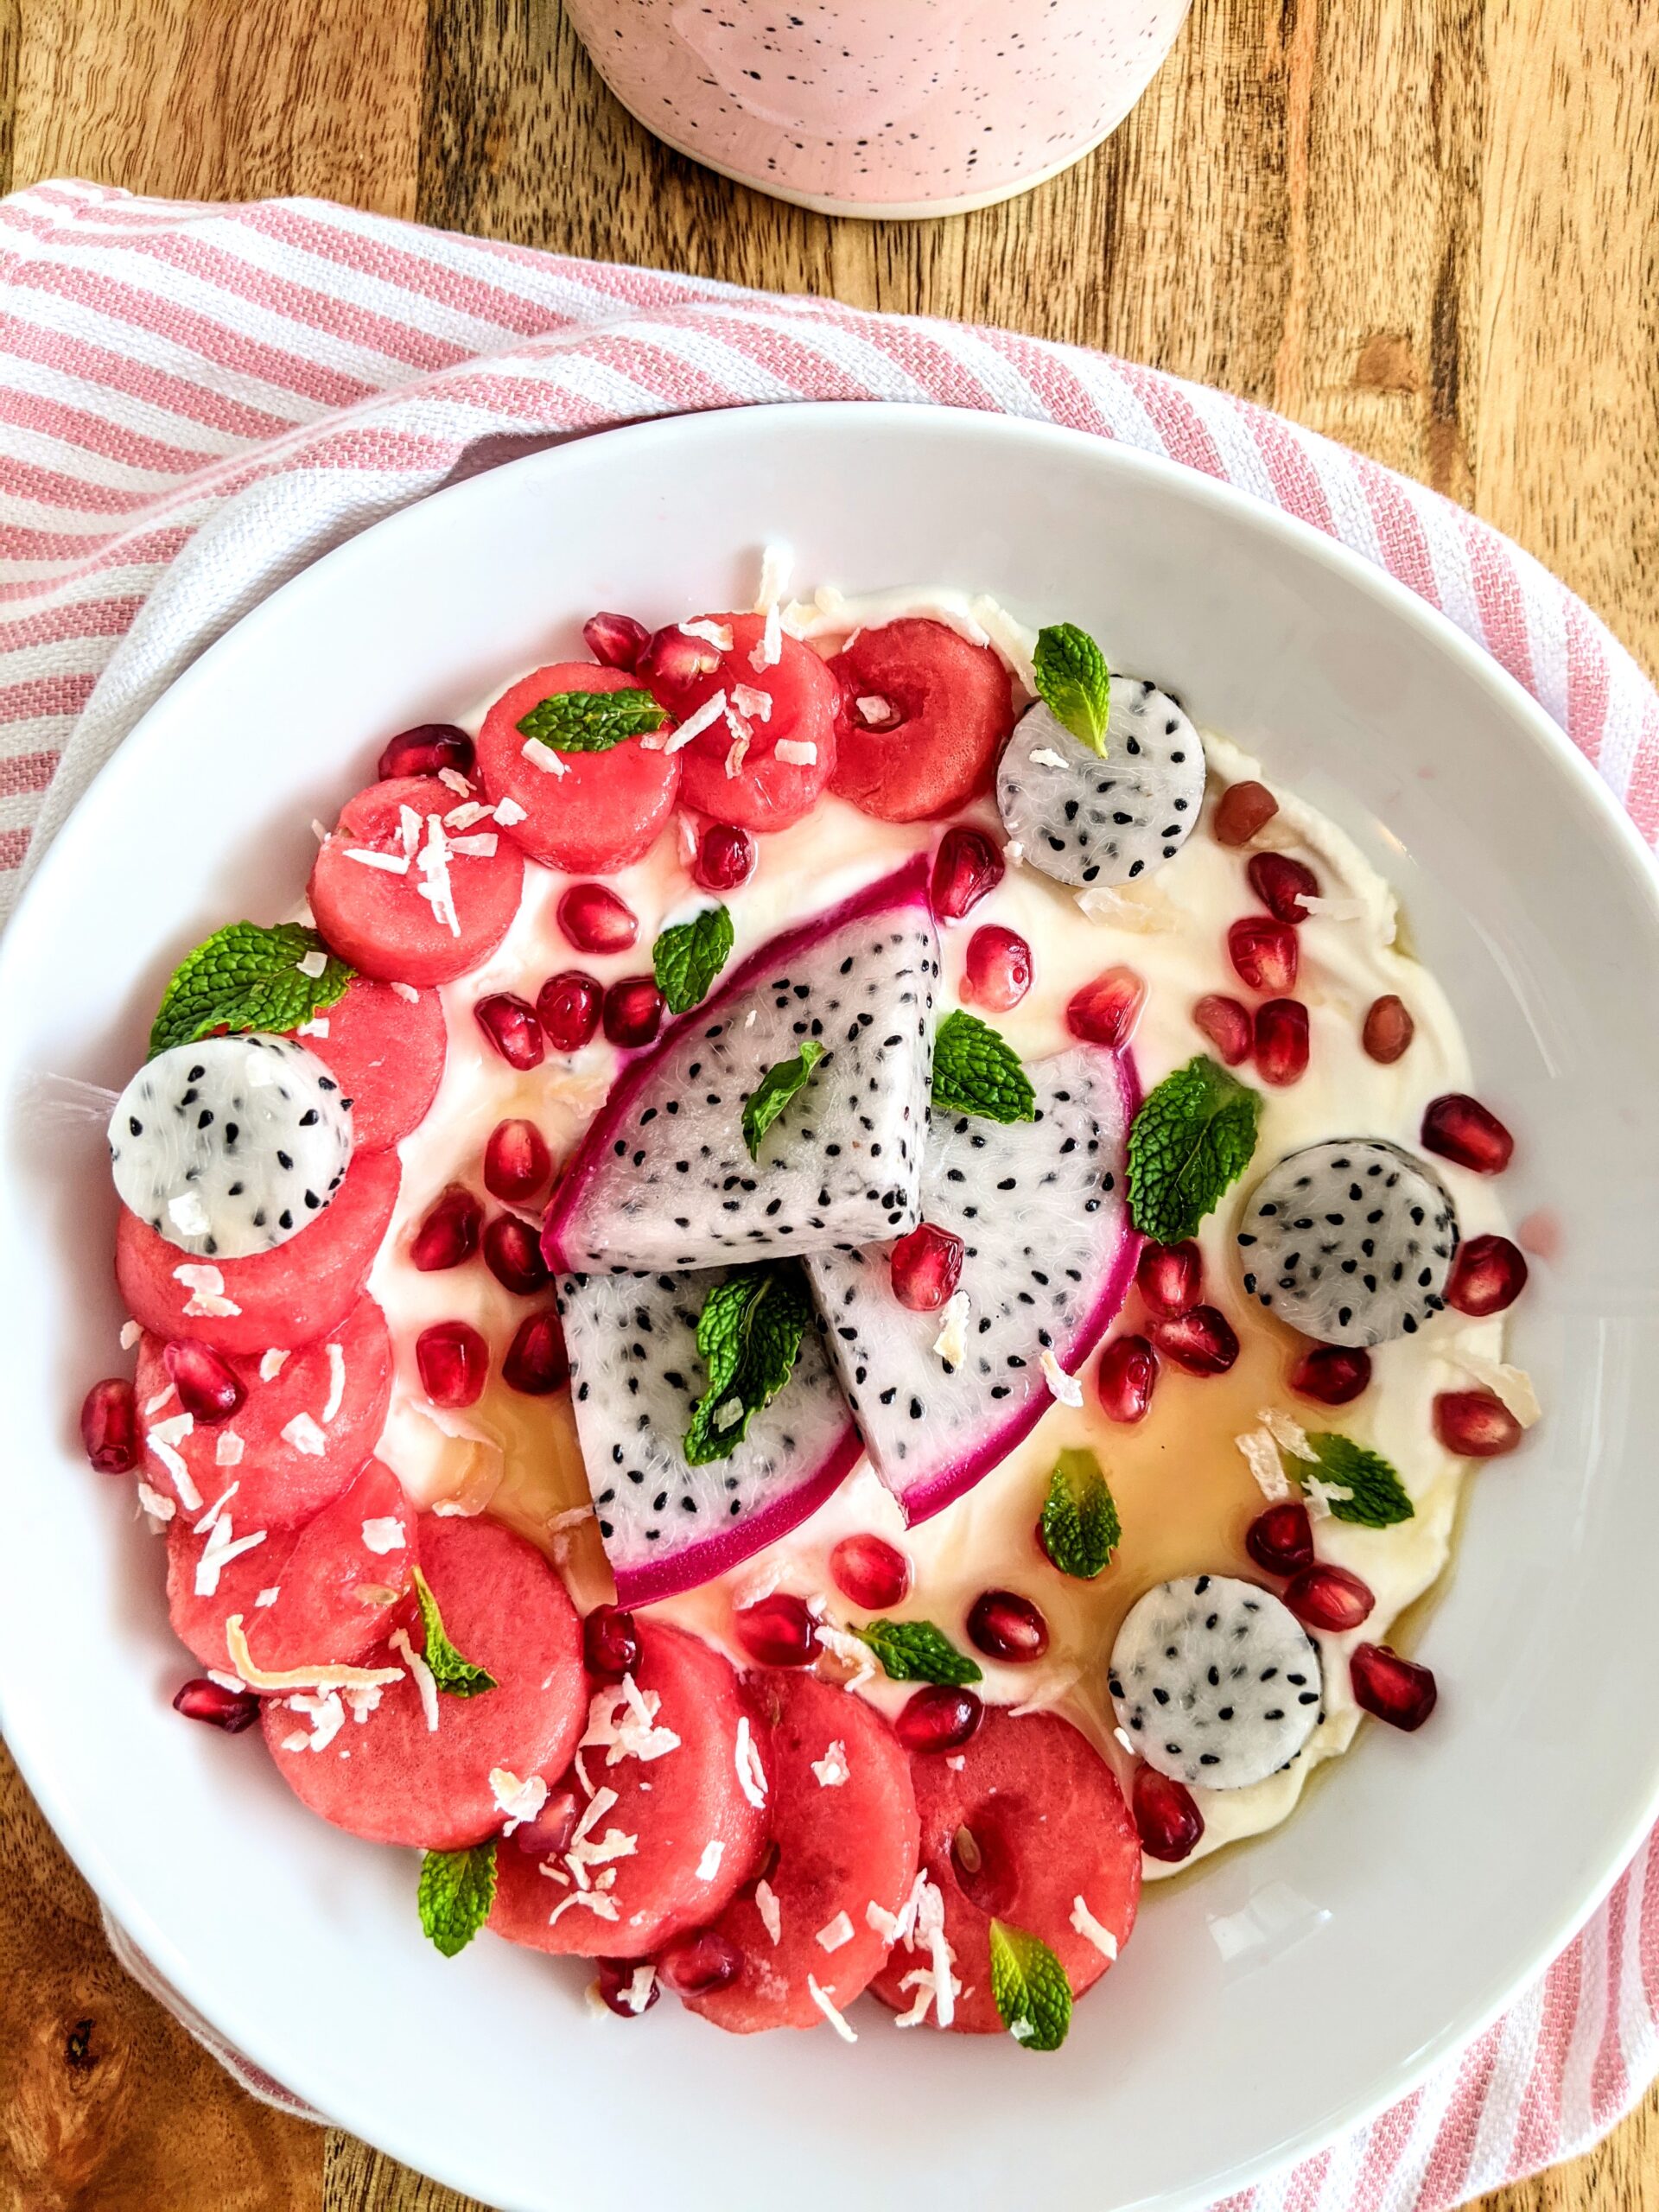 A vibrant and colorful yogurt bowl full of dragonfruit, watermelon and pomegranate. Garnished with toasted coconut flakes, honey, and mint leaves.